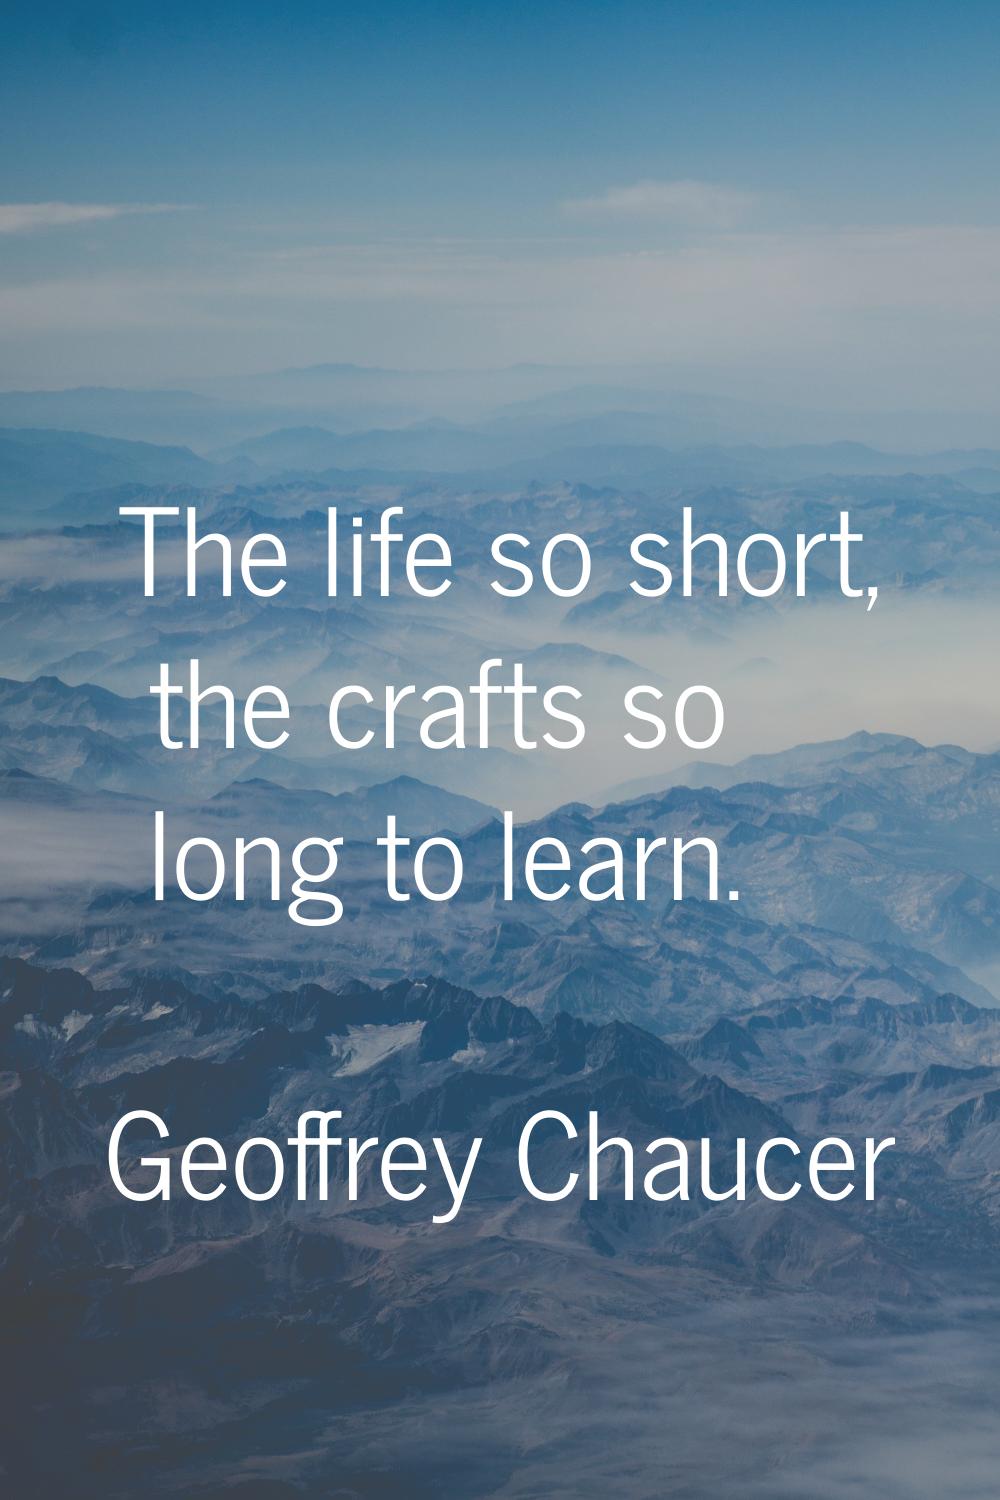 The life so short, the crafts so long to learn.